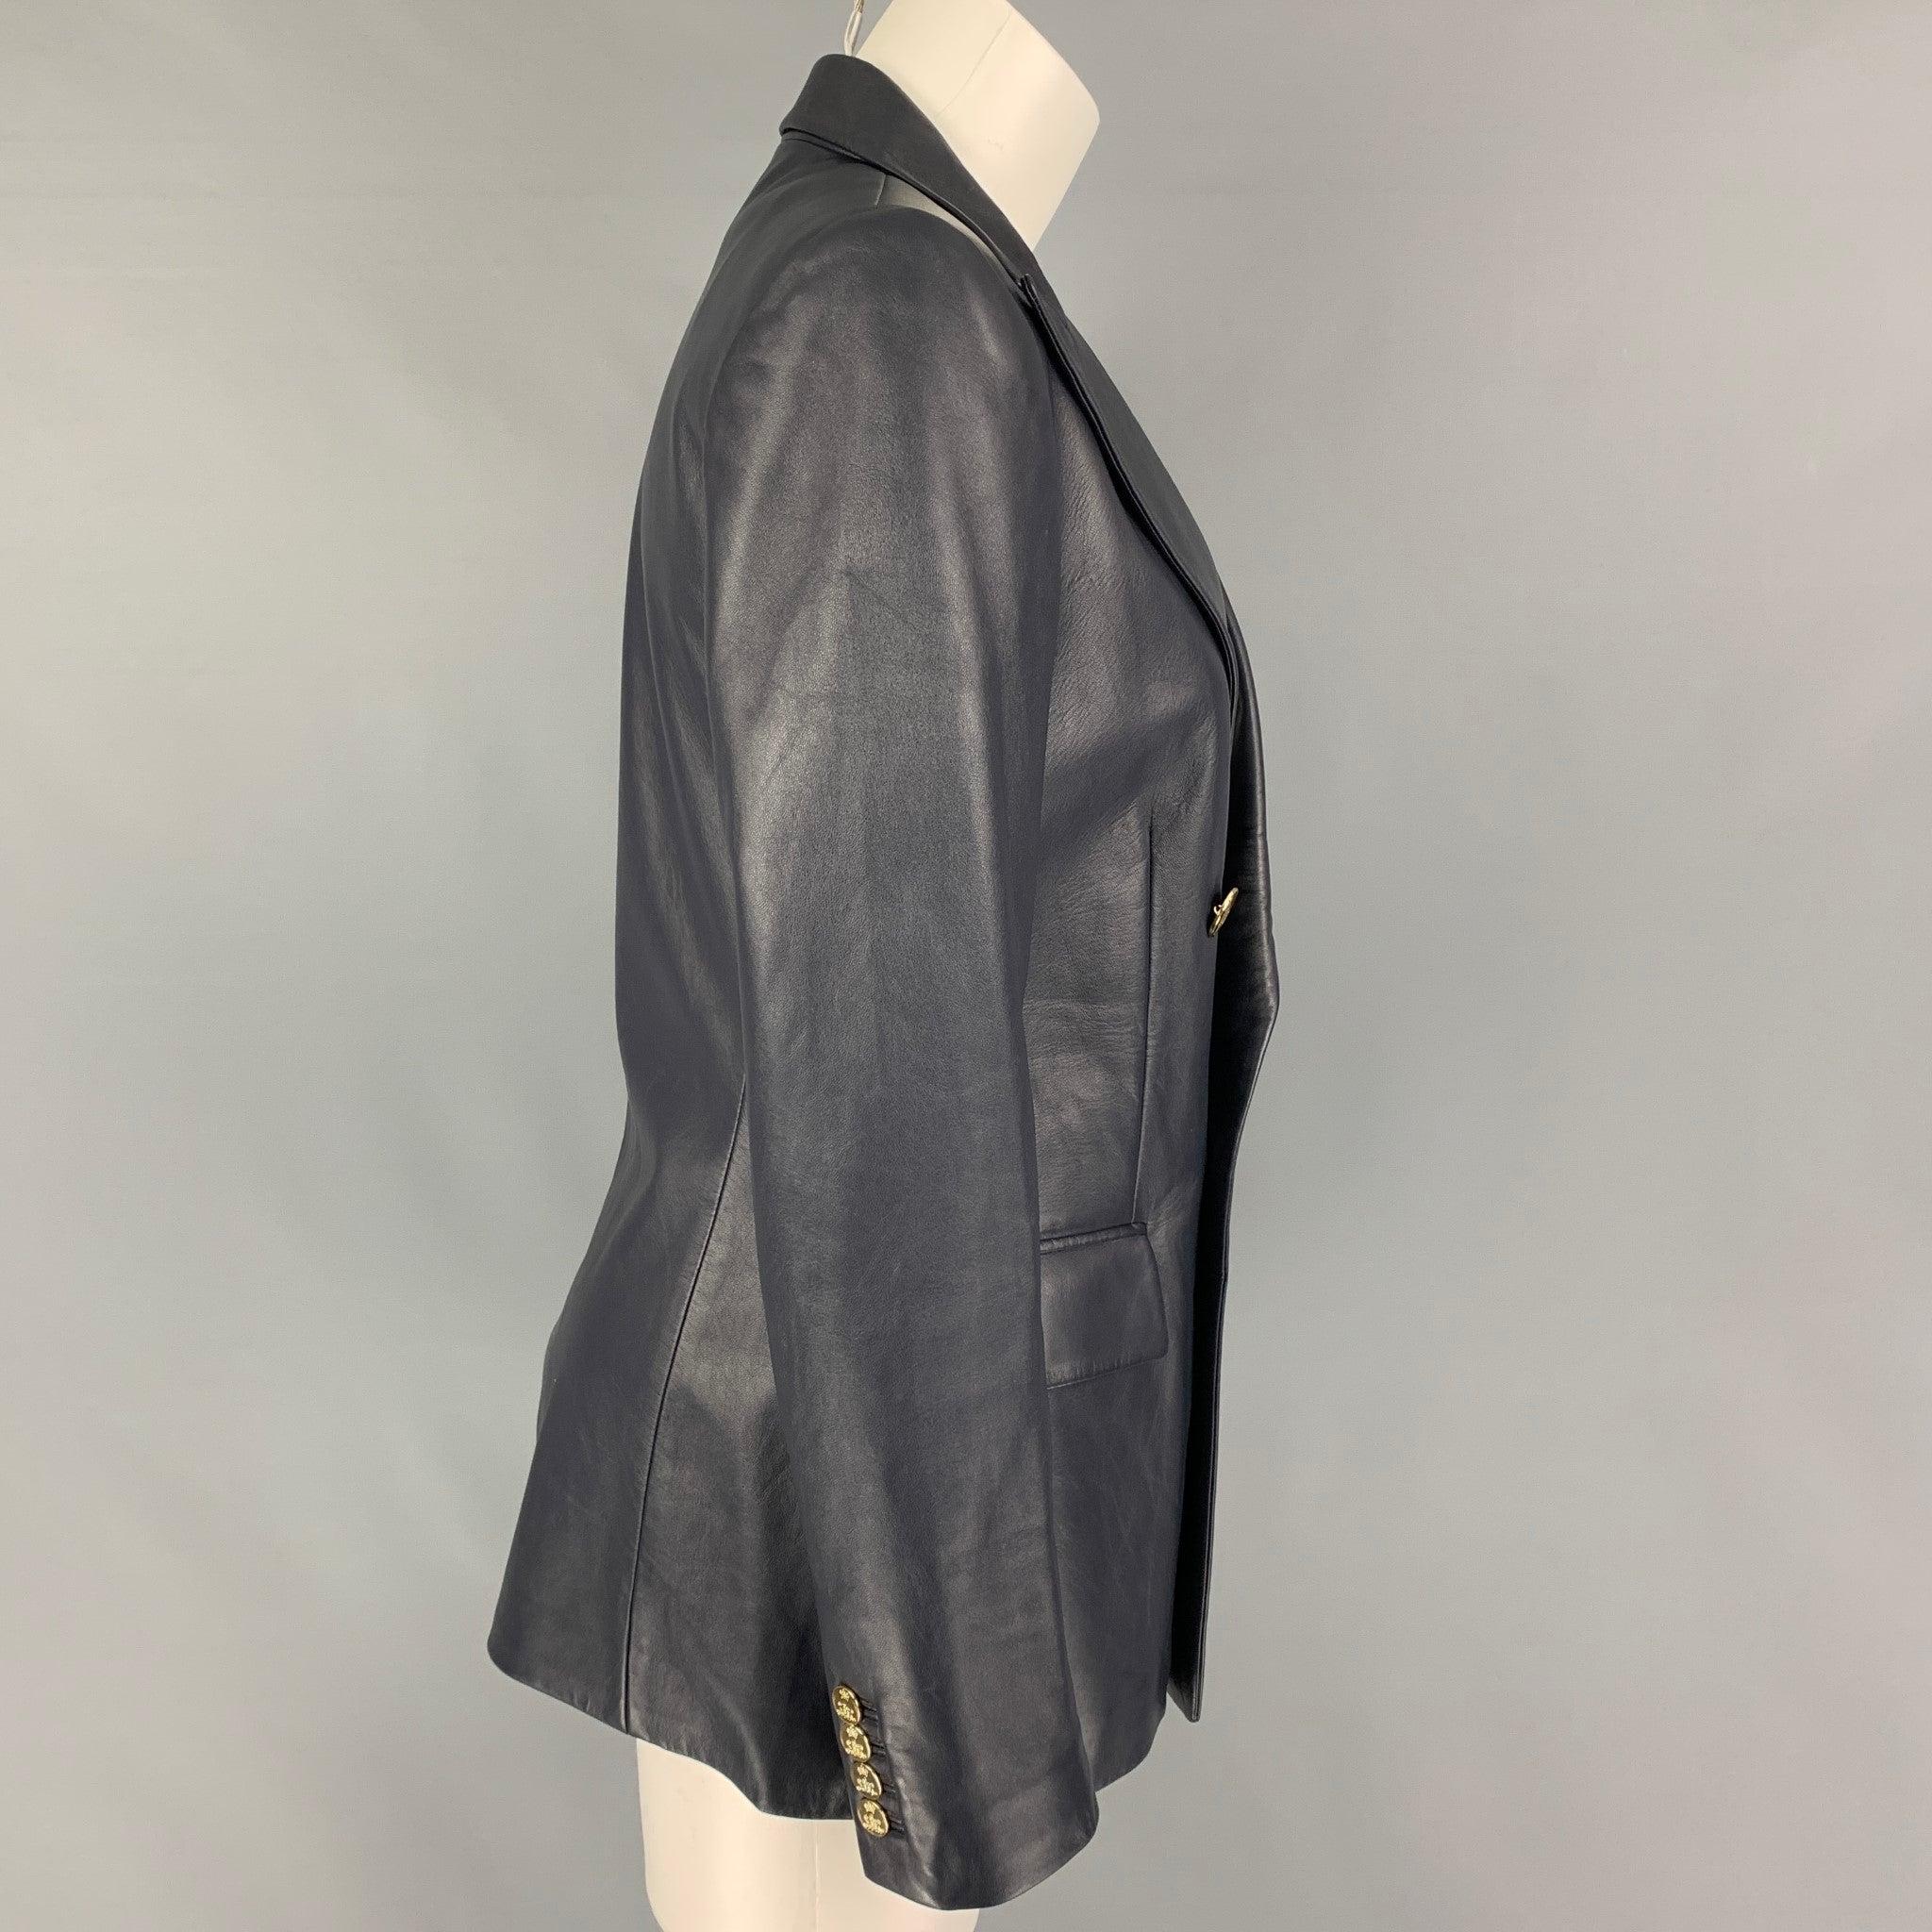 RALPH LAUREN Collection 'Camden' jacket comes in a navy lamb skin leather with a full liner featuring a peak lapel, flap pockets, and a gold tone double breasted closure. Made in Italy.
Very Good
Pre-Owned Condition. 

Marked:   8 

Measurements: 
